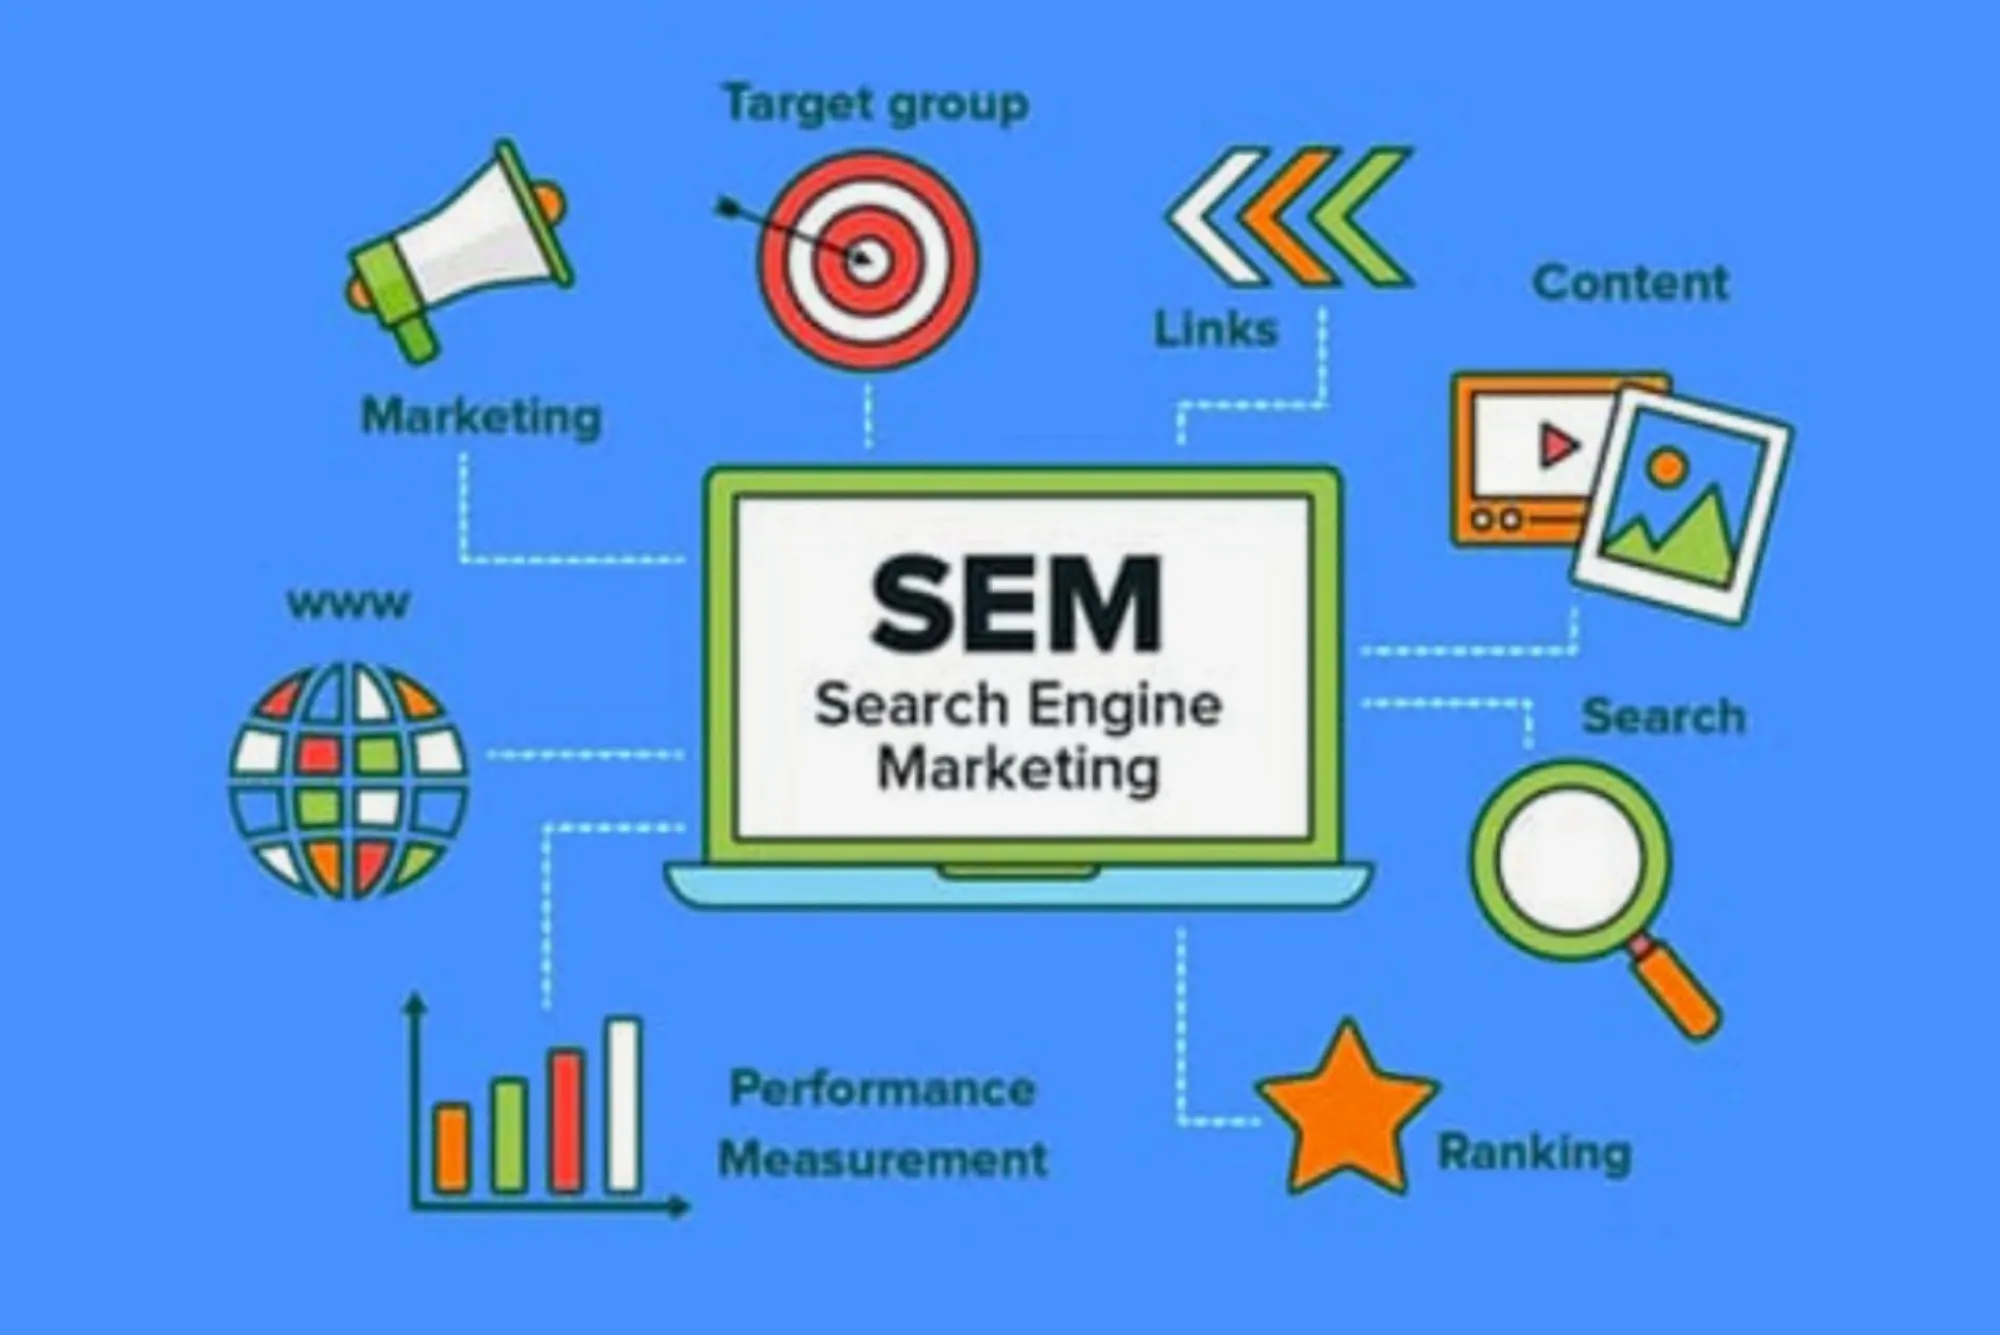 When Advertising Using SEM, You Only Pay